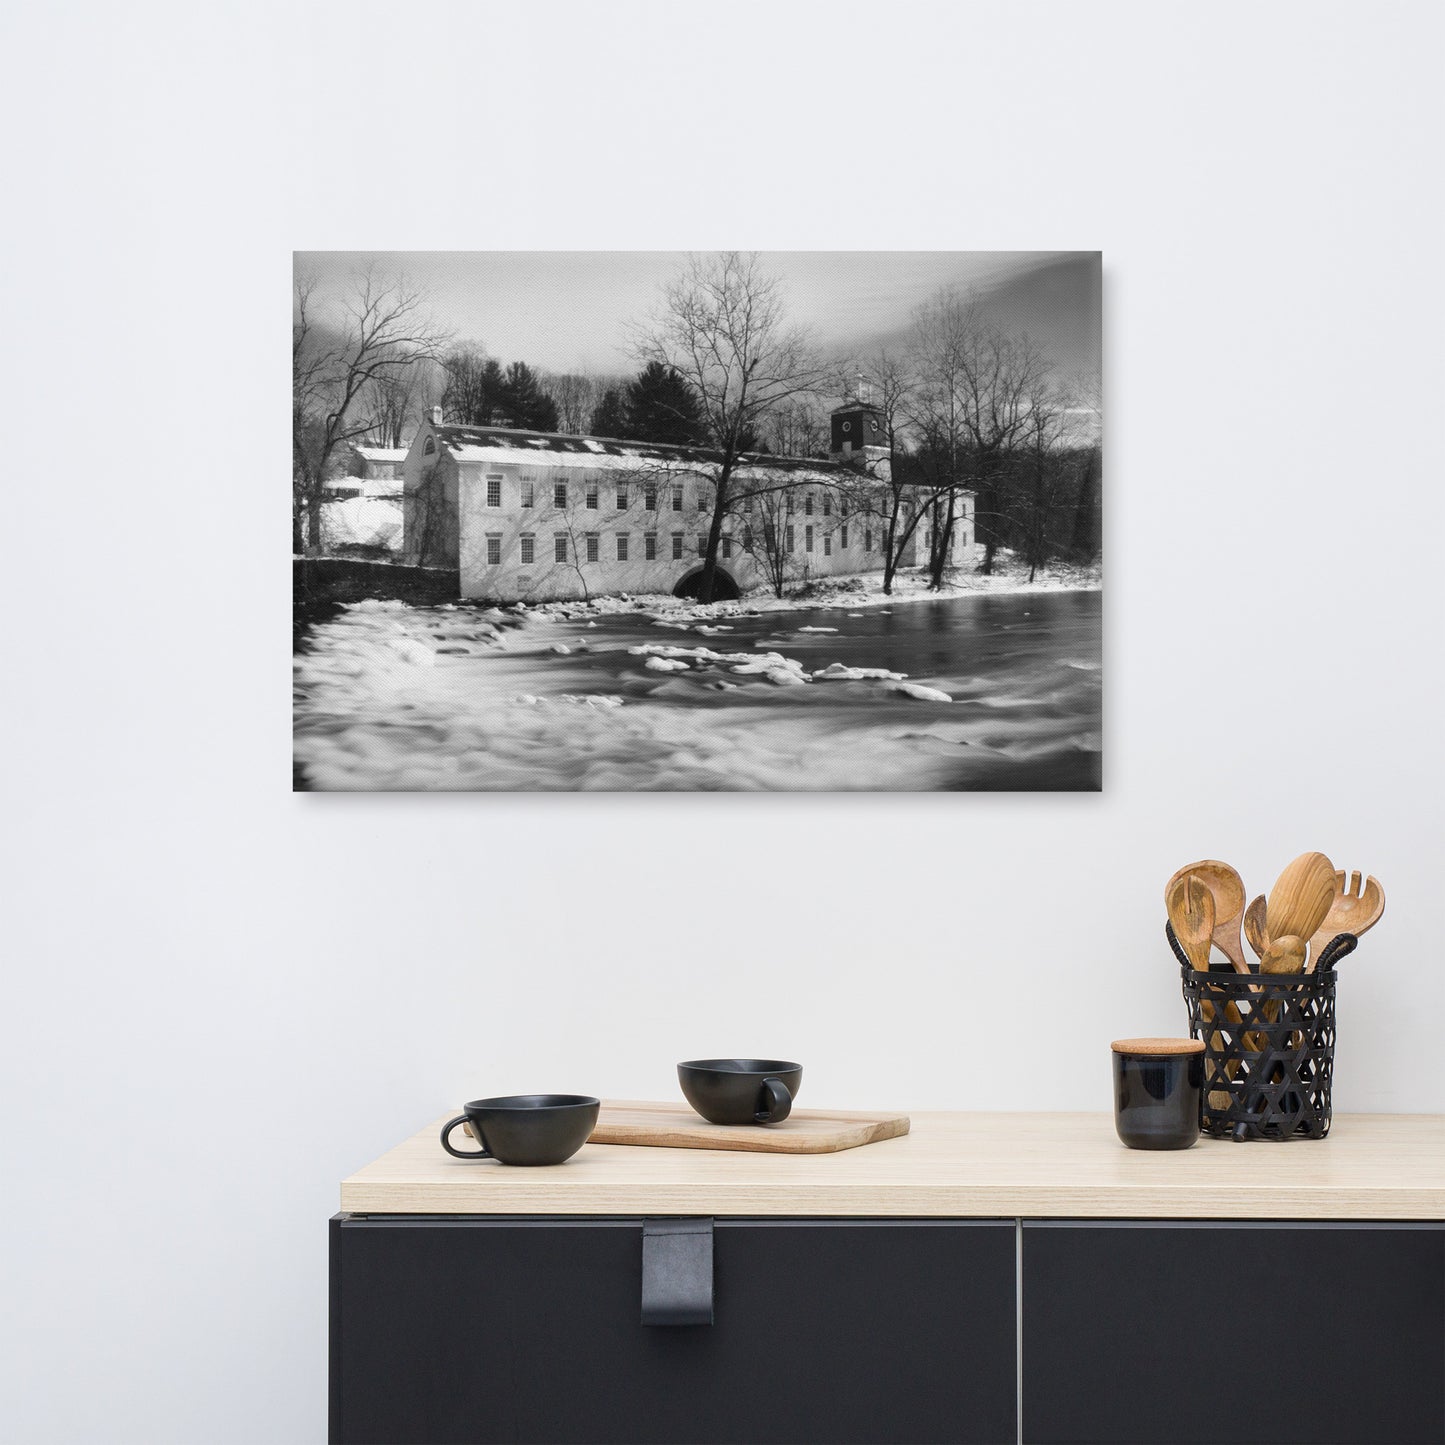 Winter at Powder Mill Black and White Rural Landscape Canvas Wall Art Prints